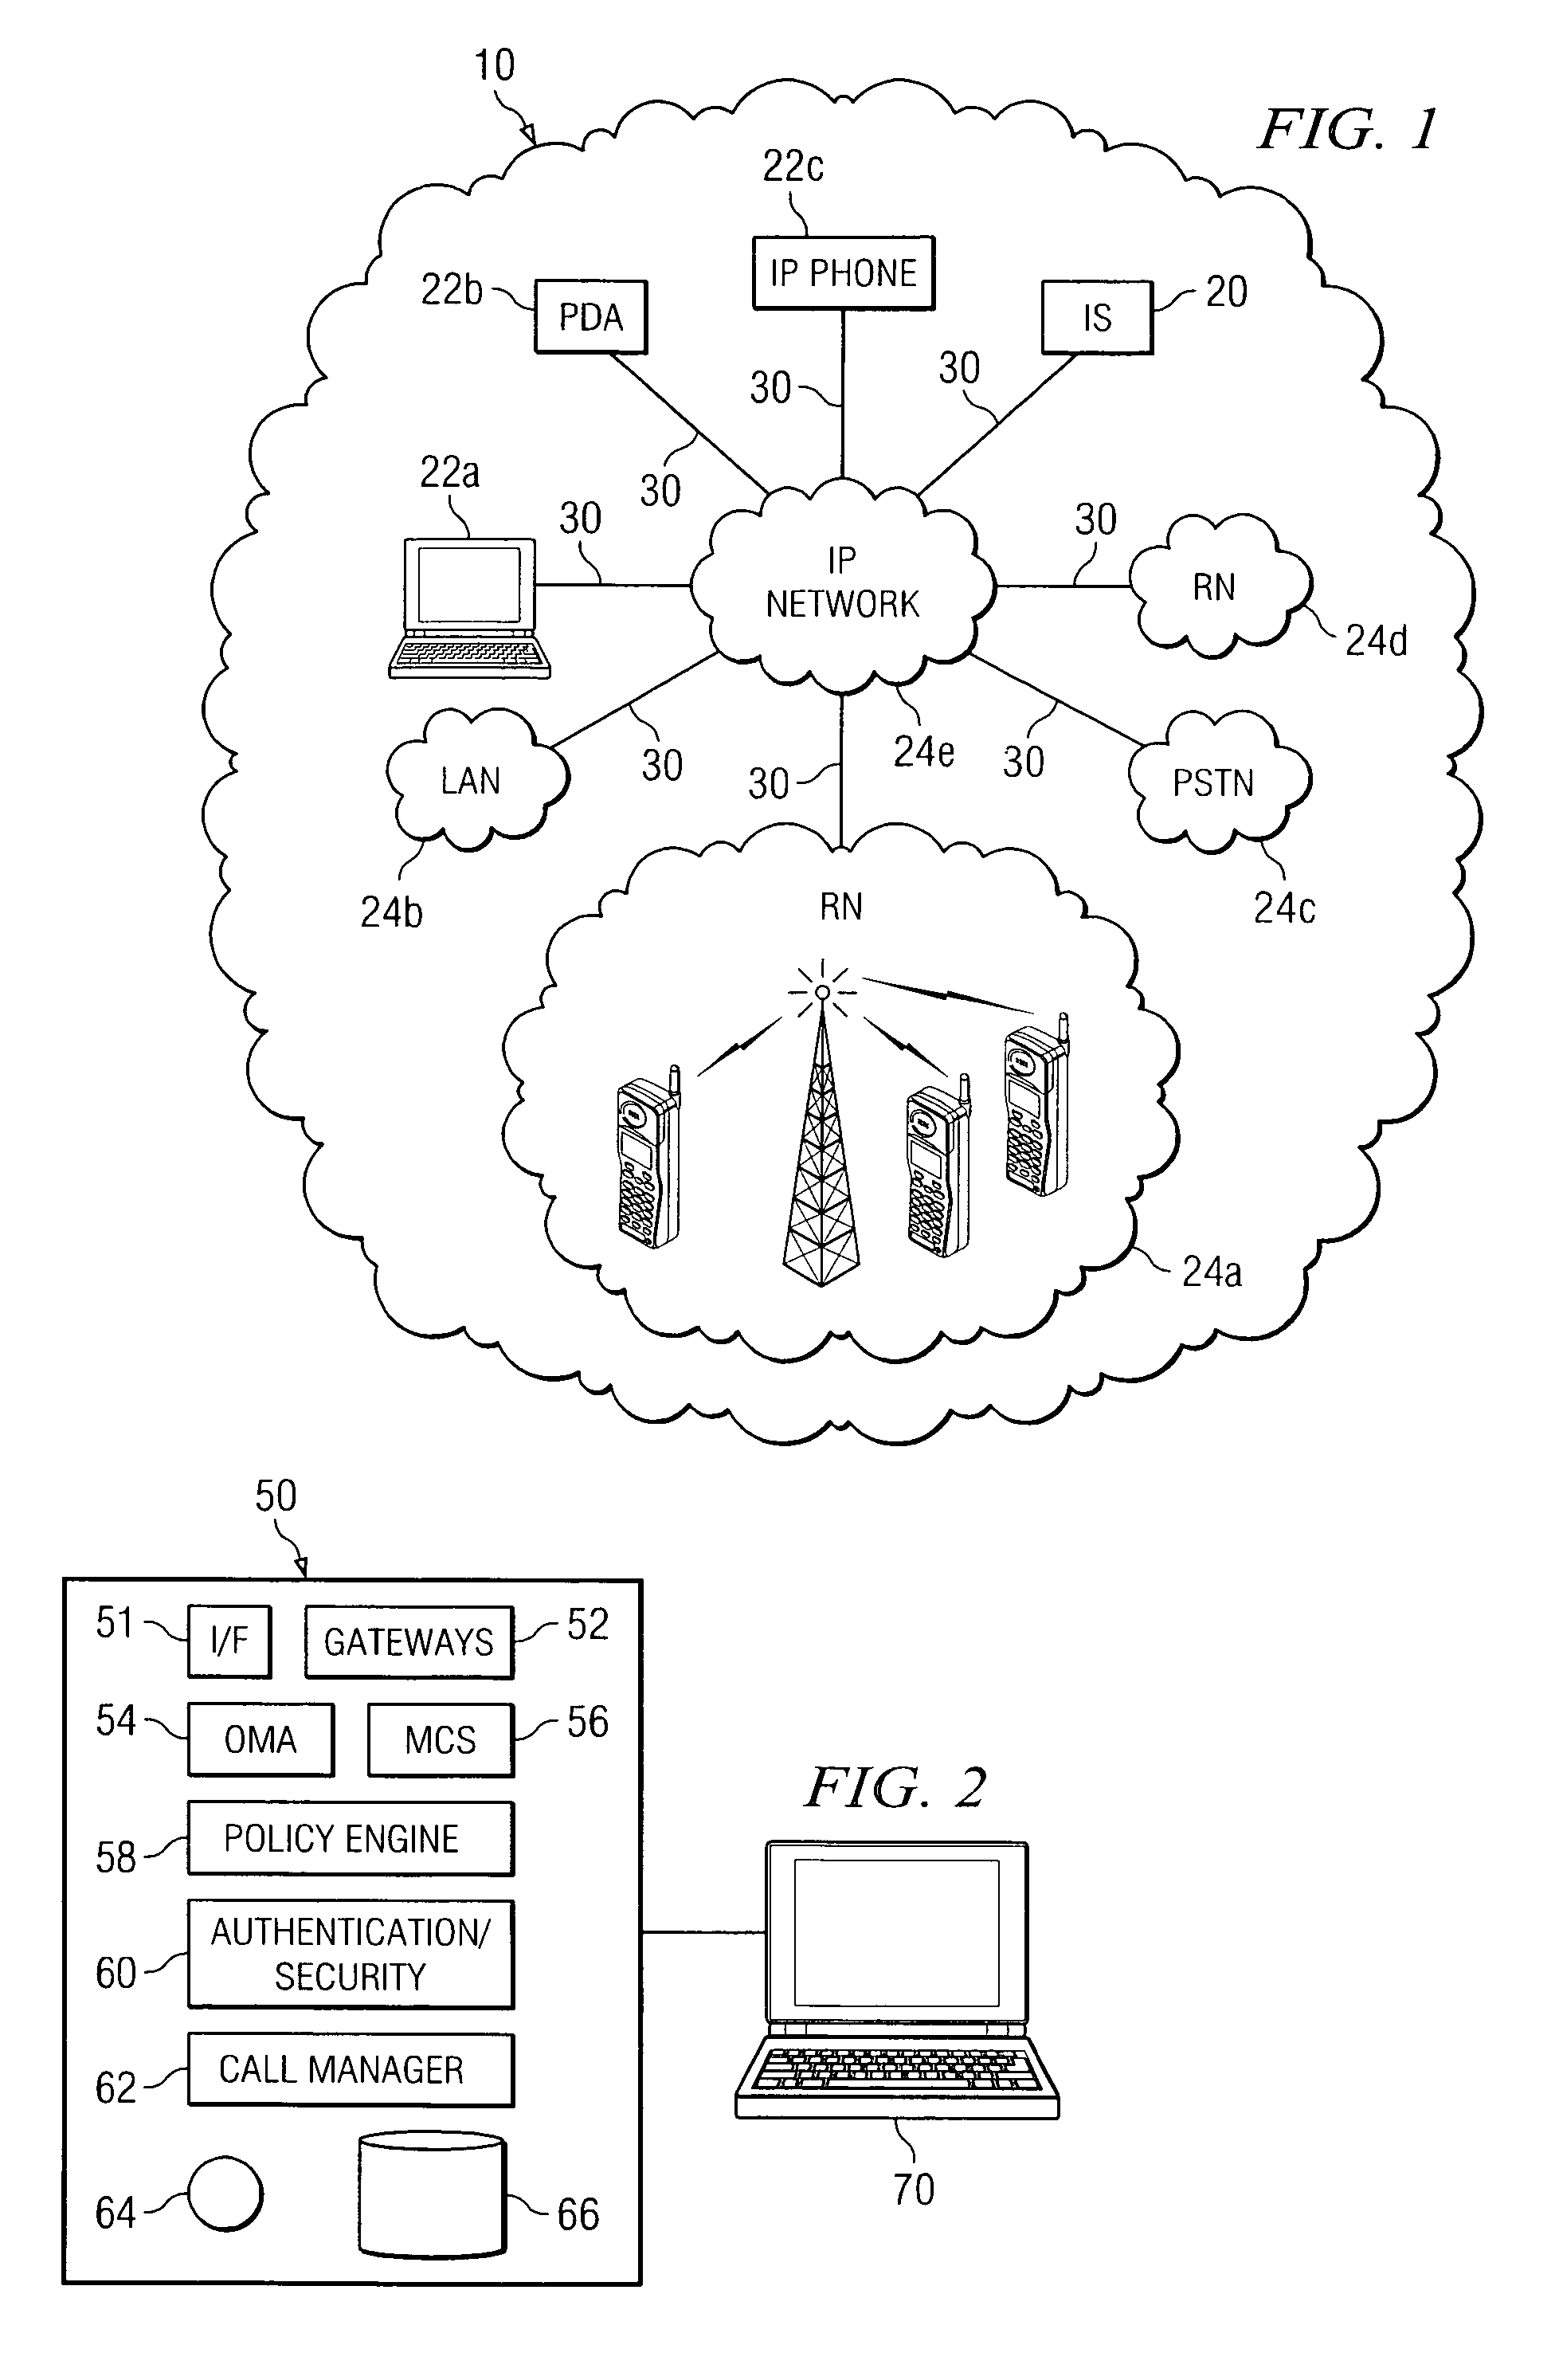 Method and system for providing interoperable communications with location information